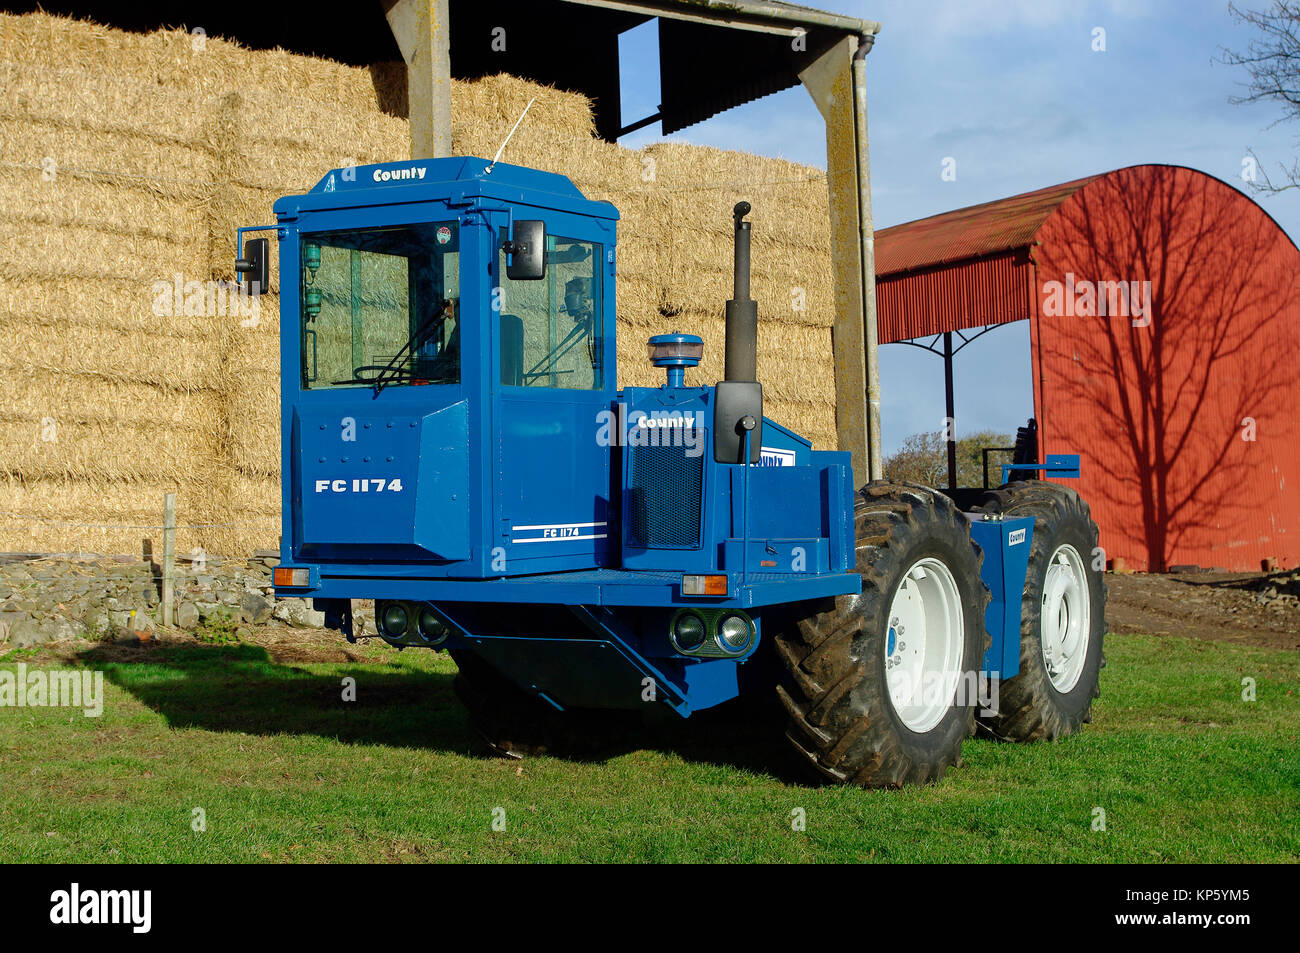 County FC 1174 tractor Stock Photo